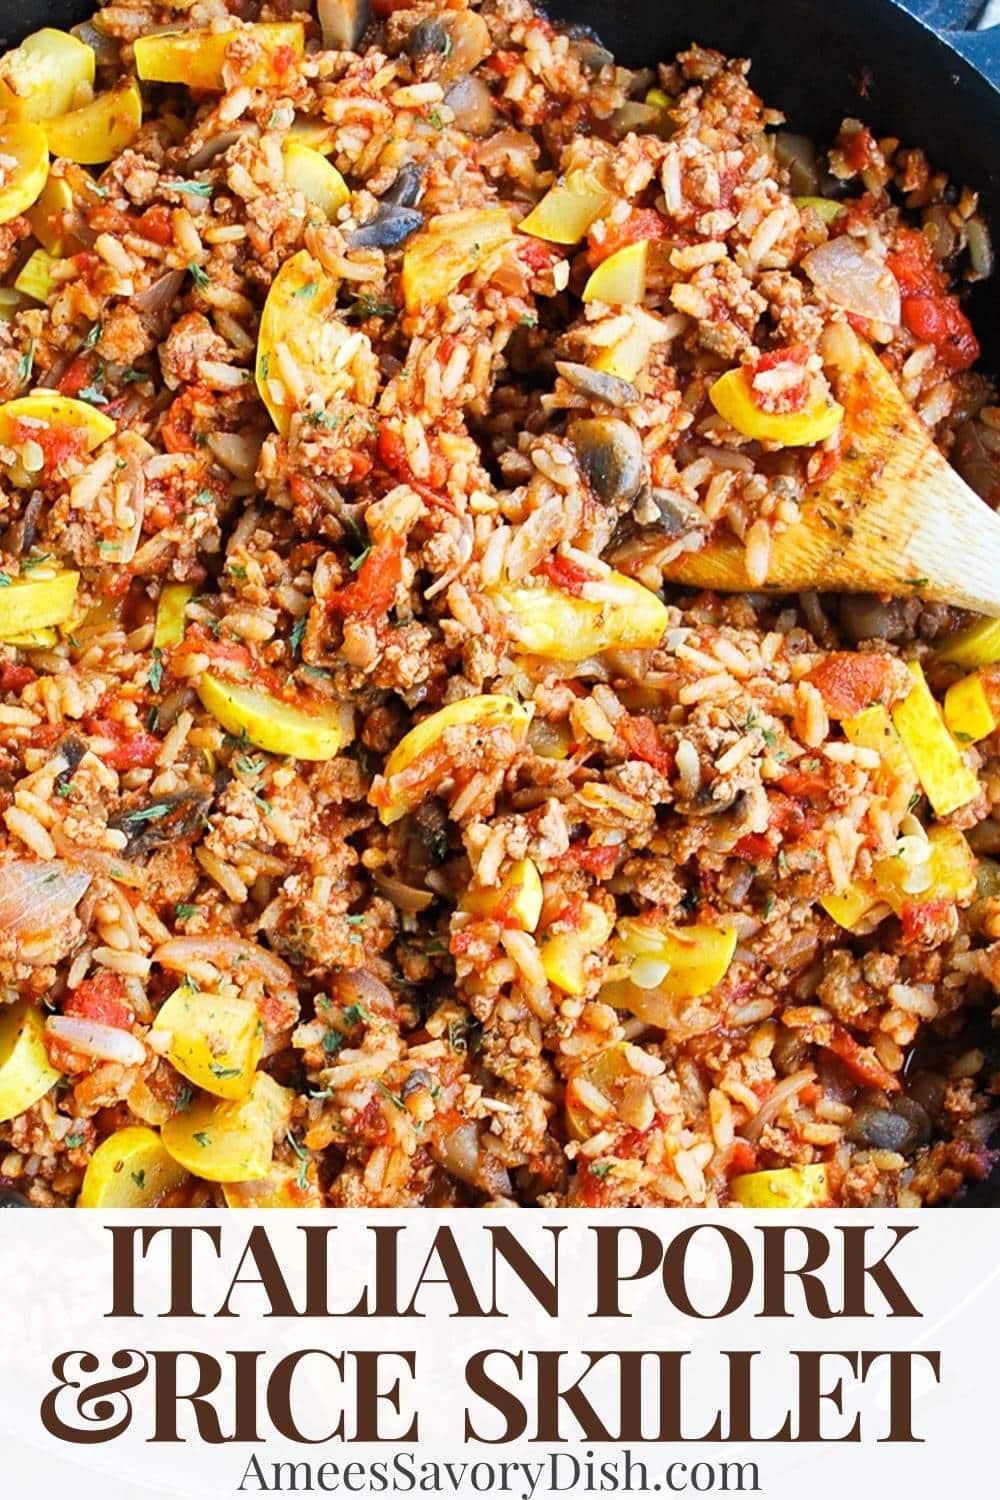 Italian ground pork skillet is a gluten-free one-dish recipe made with rice, tomatoes, squash, mushrooms, onions, herbs, and spices. via @Ameessavorydish